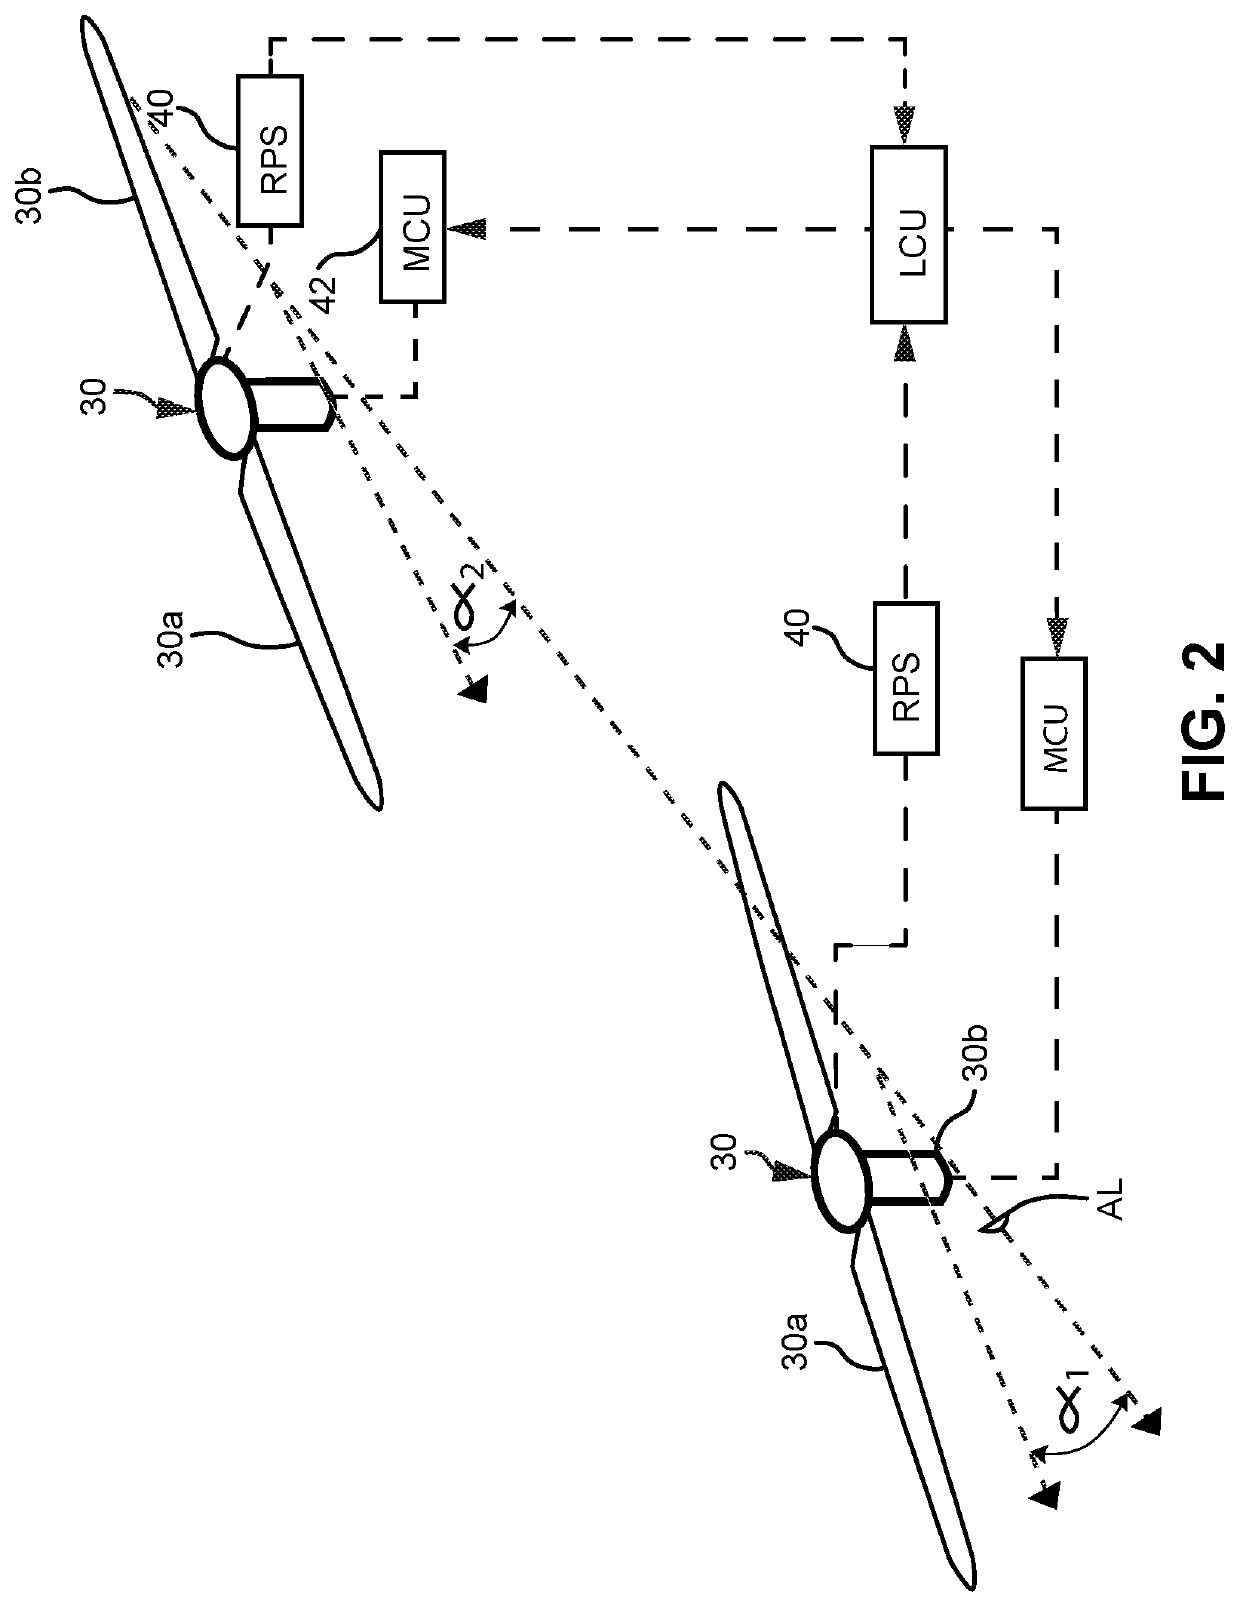 Vertical take-off and landing (VTOL) aircraft with cruise rotor positioning control for minimum drag